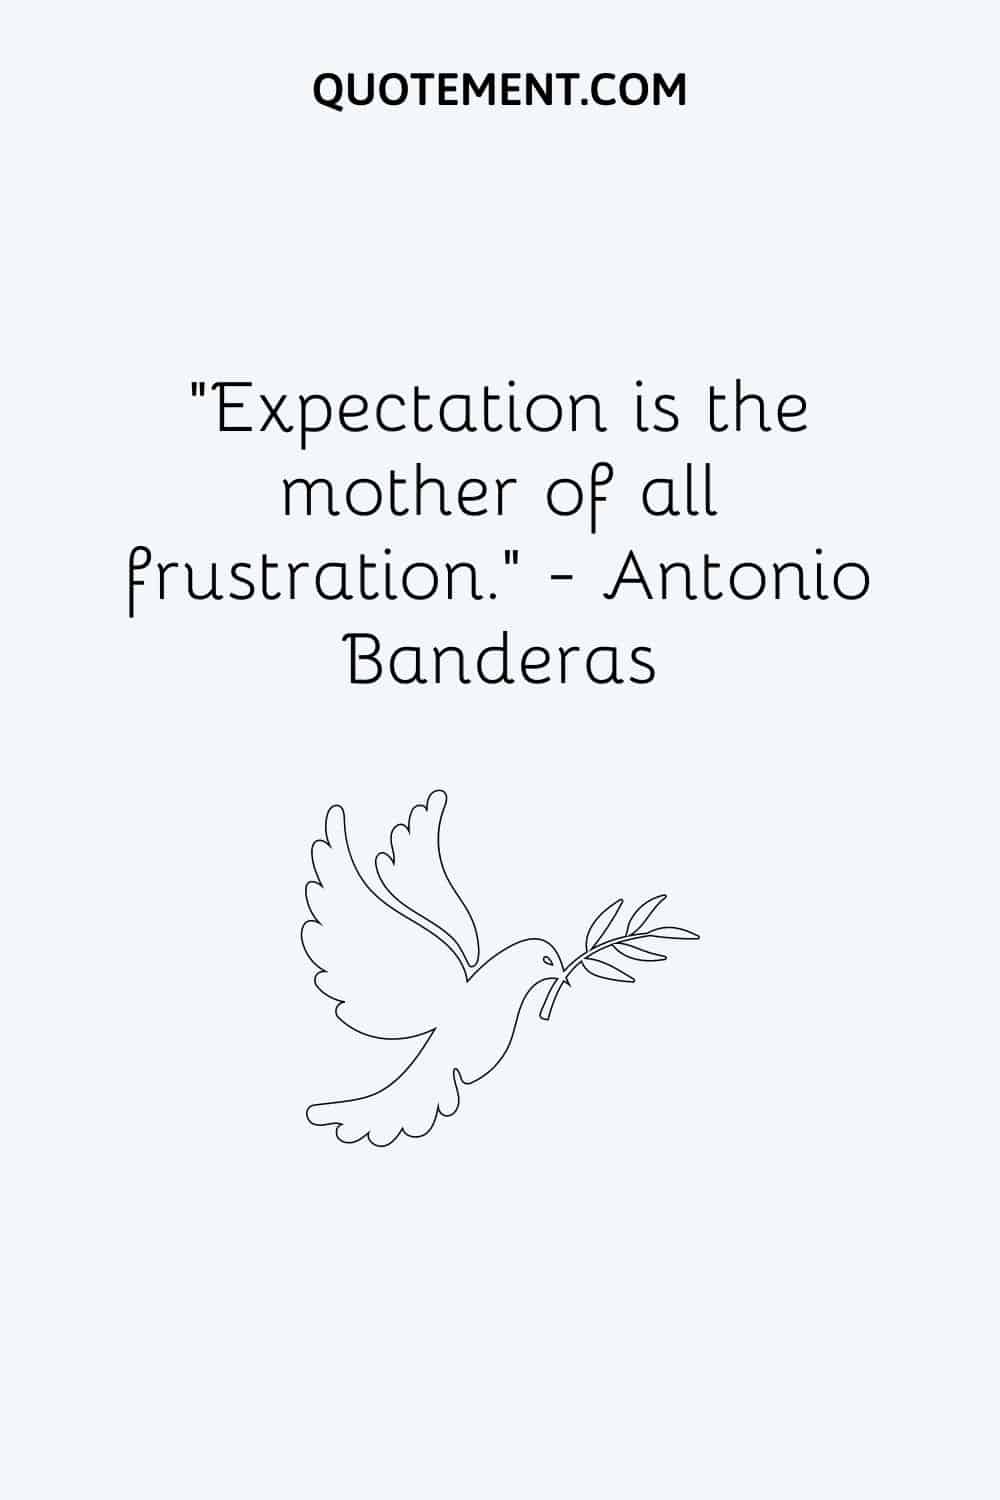 Expectation is the mother of all frustration